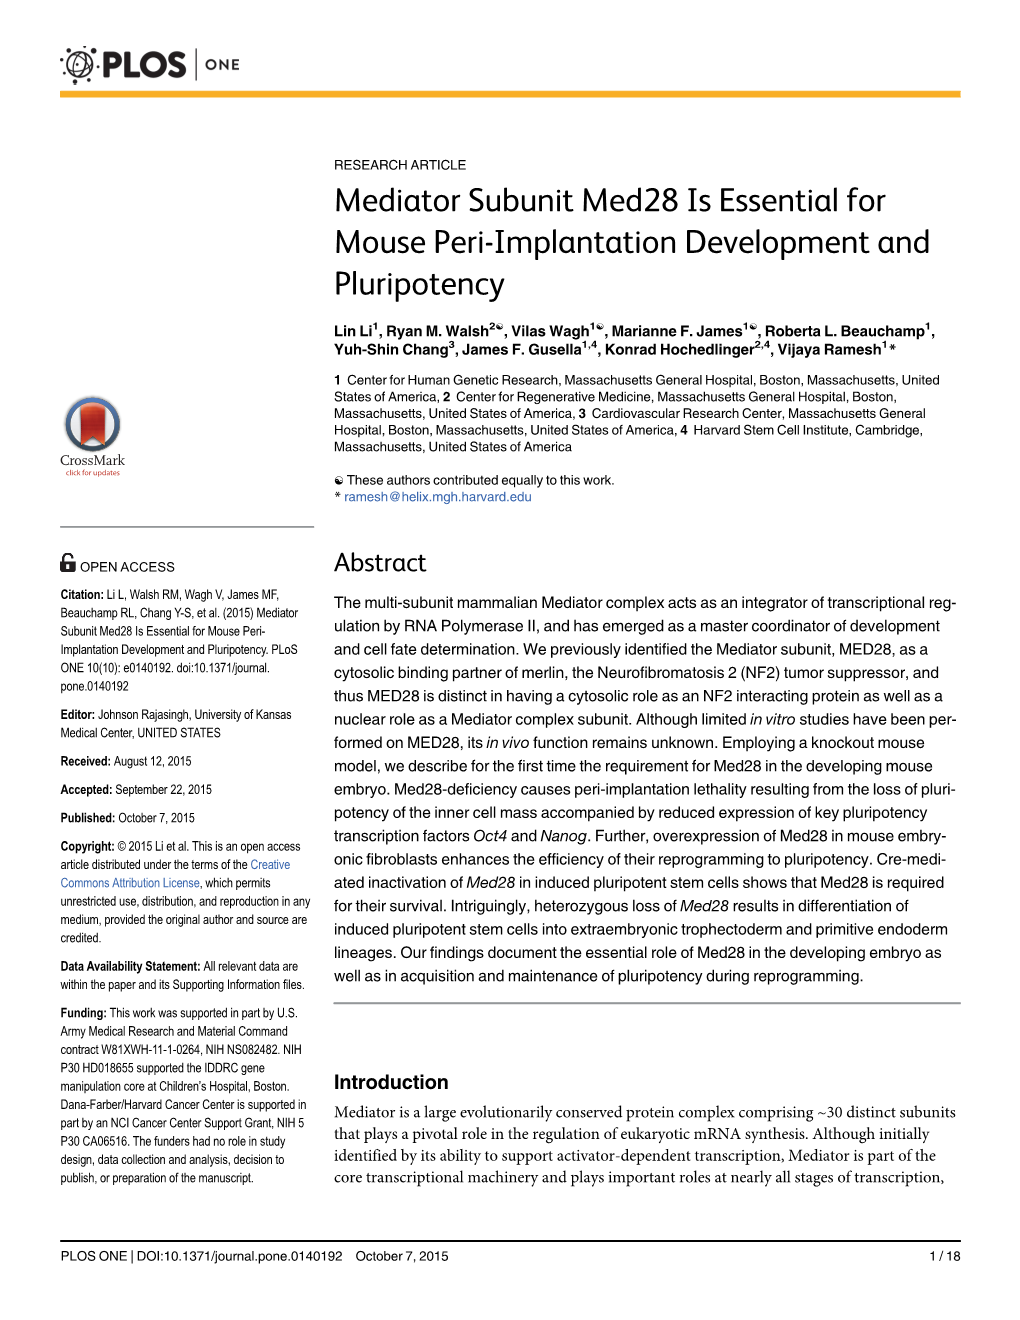 Mediator Subunit Med28 Is Essential for Mouse Peri-Implantation Development and Pluripotency